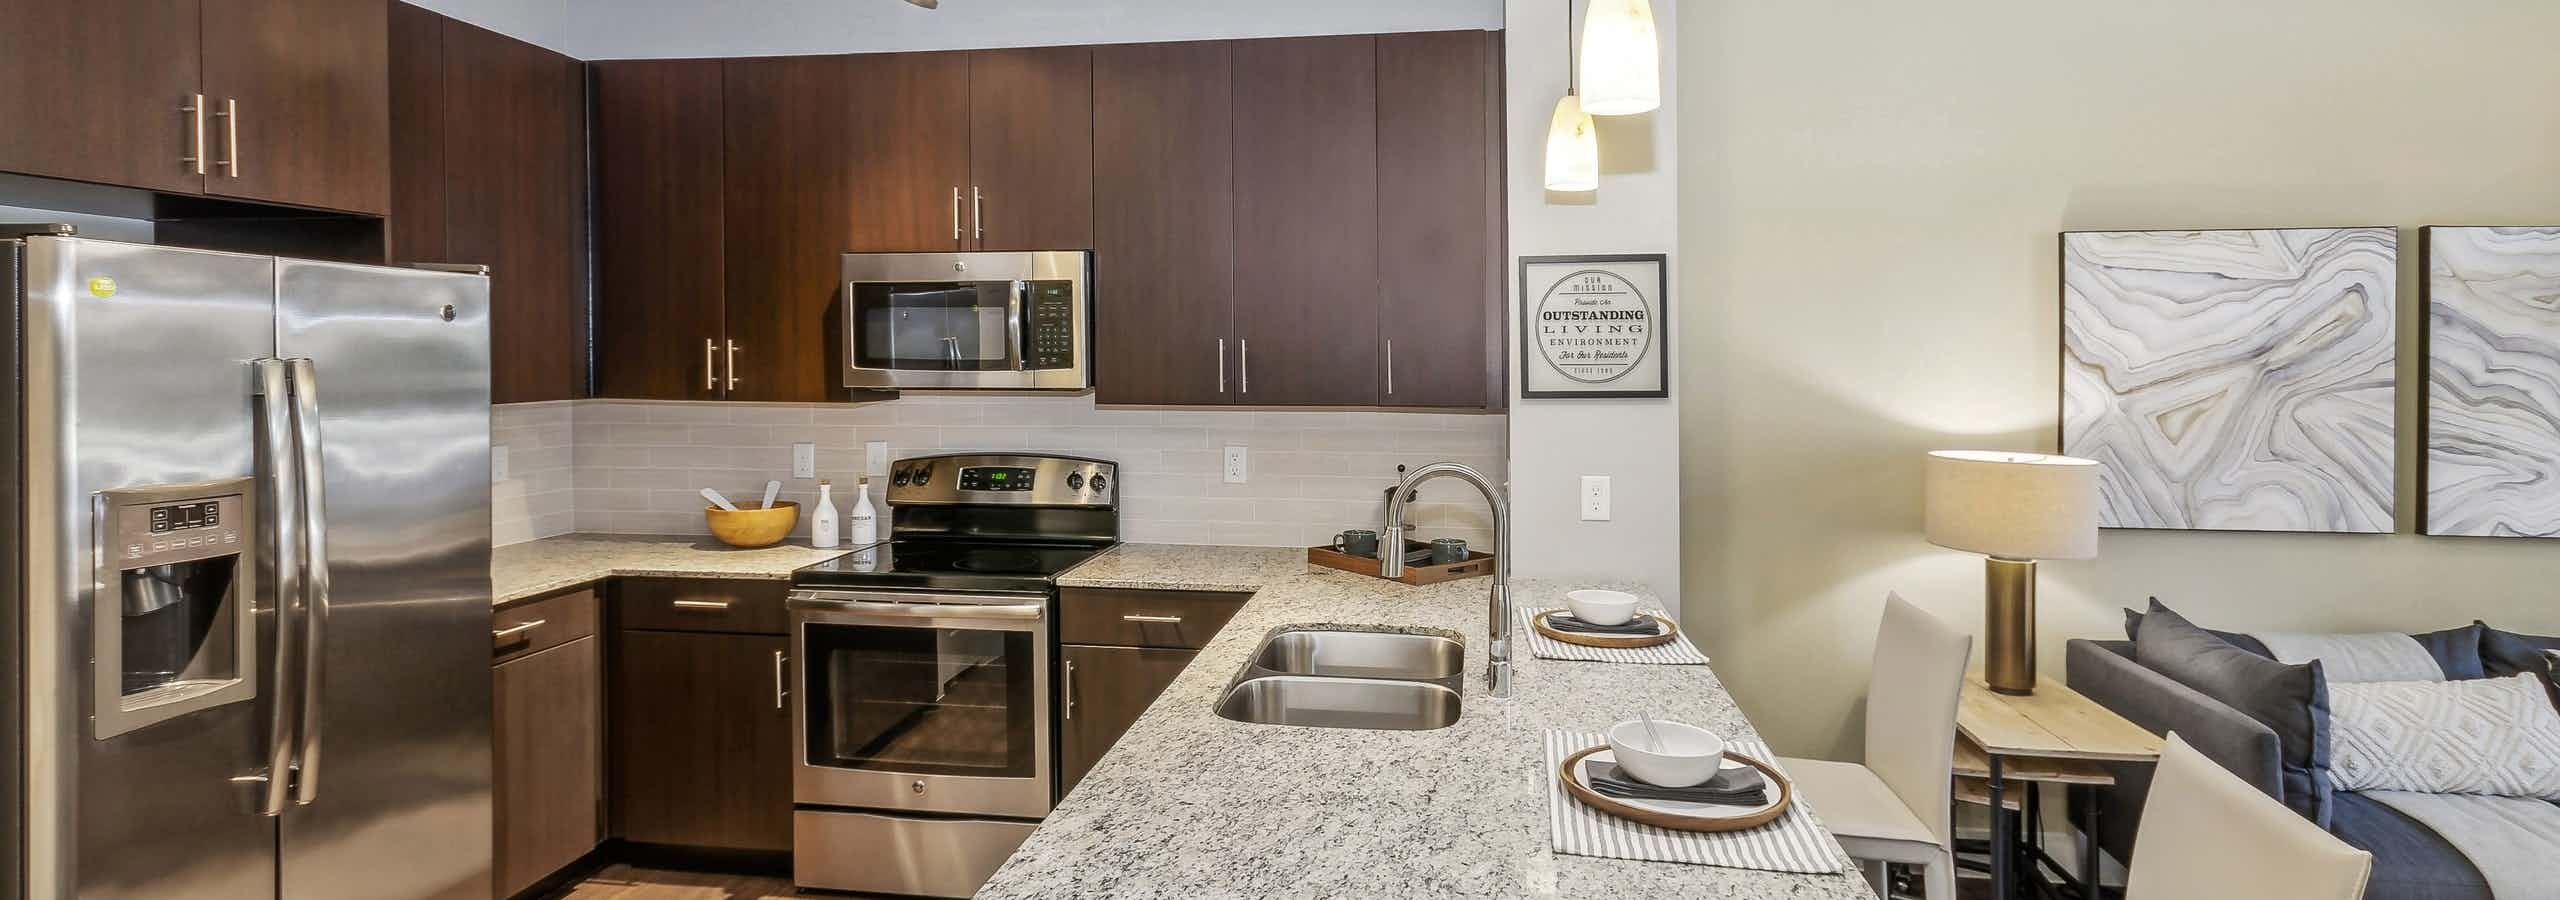 Fully-equipped kitchen with stainless steel appliances